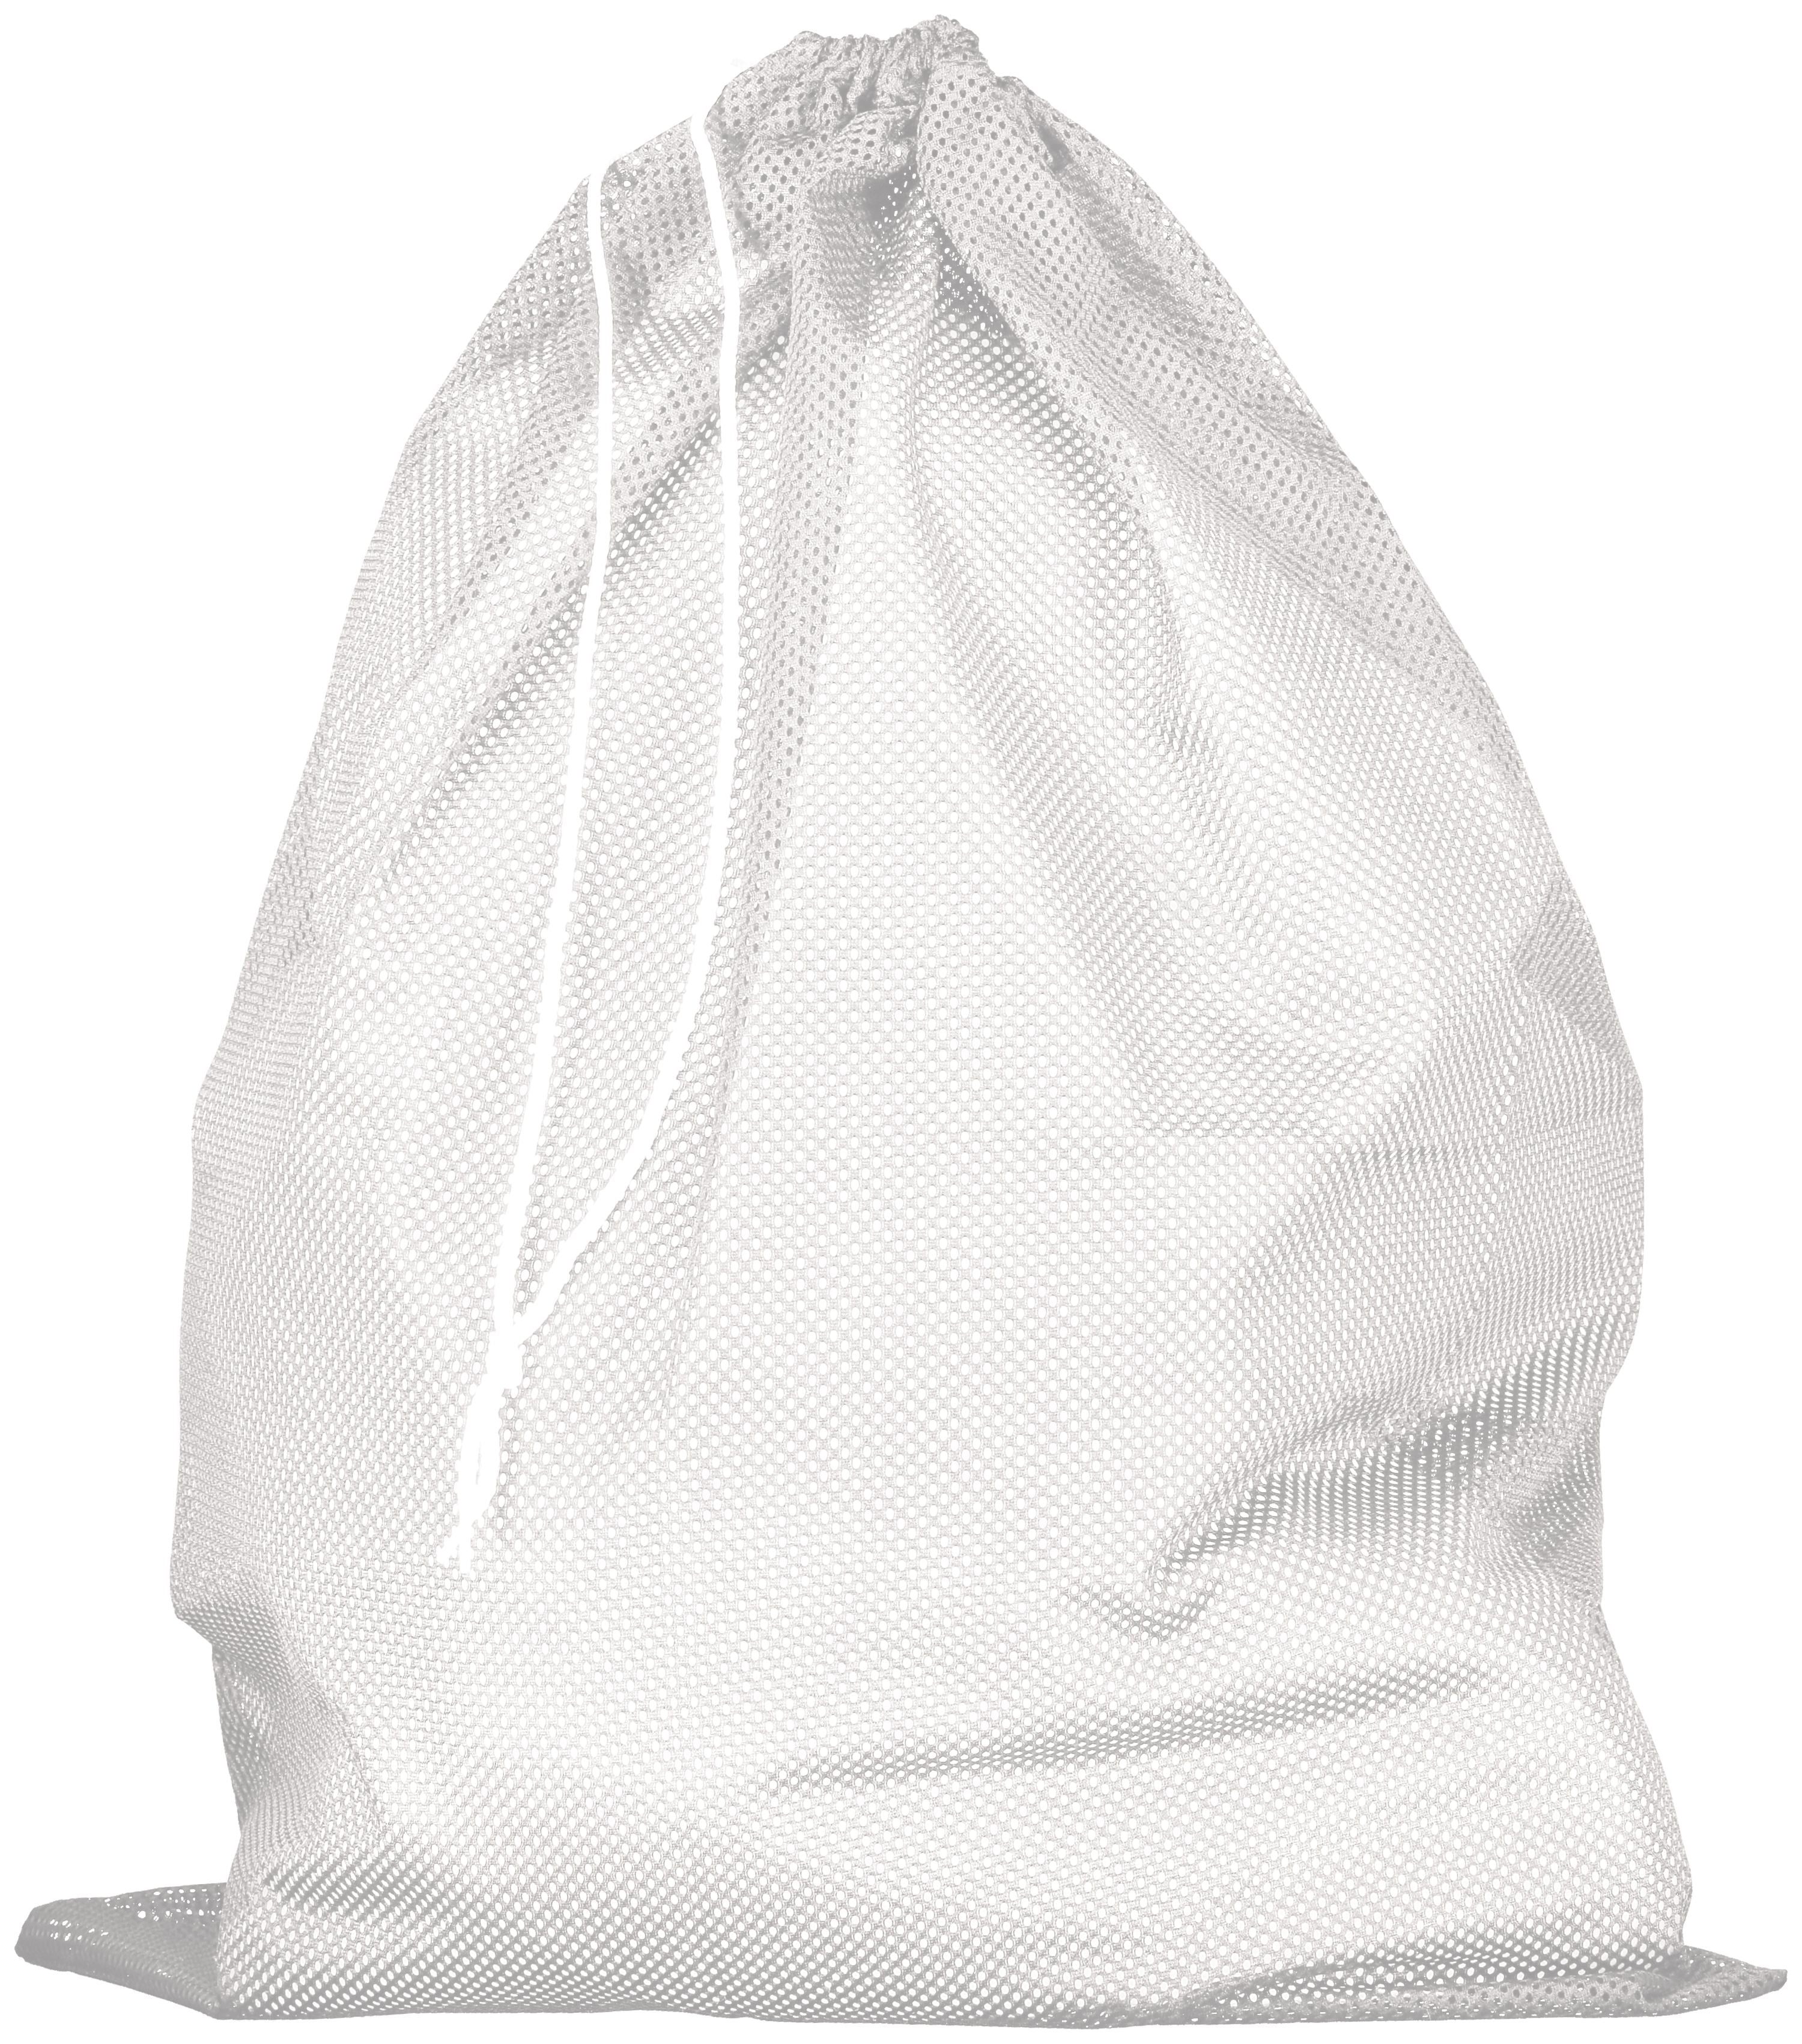 Russell Athletic Mesh Laundry Bag